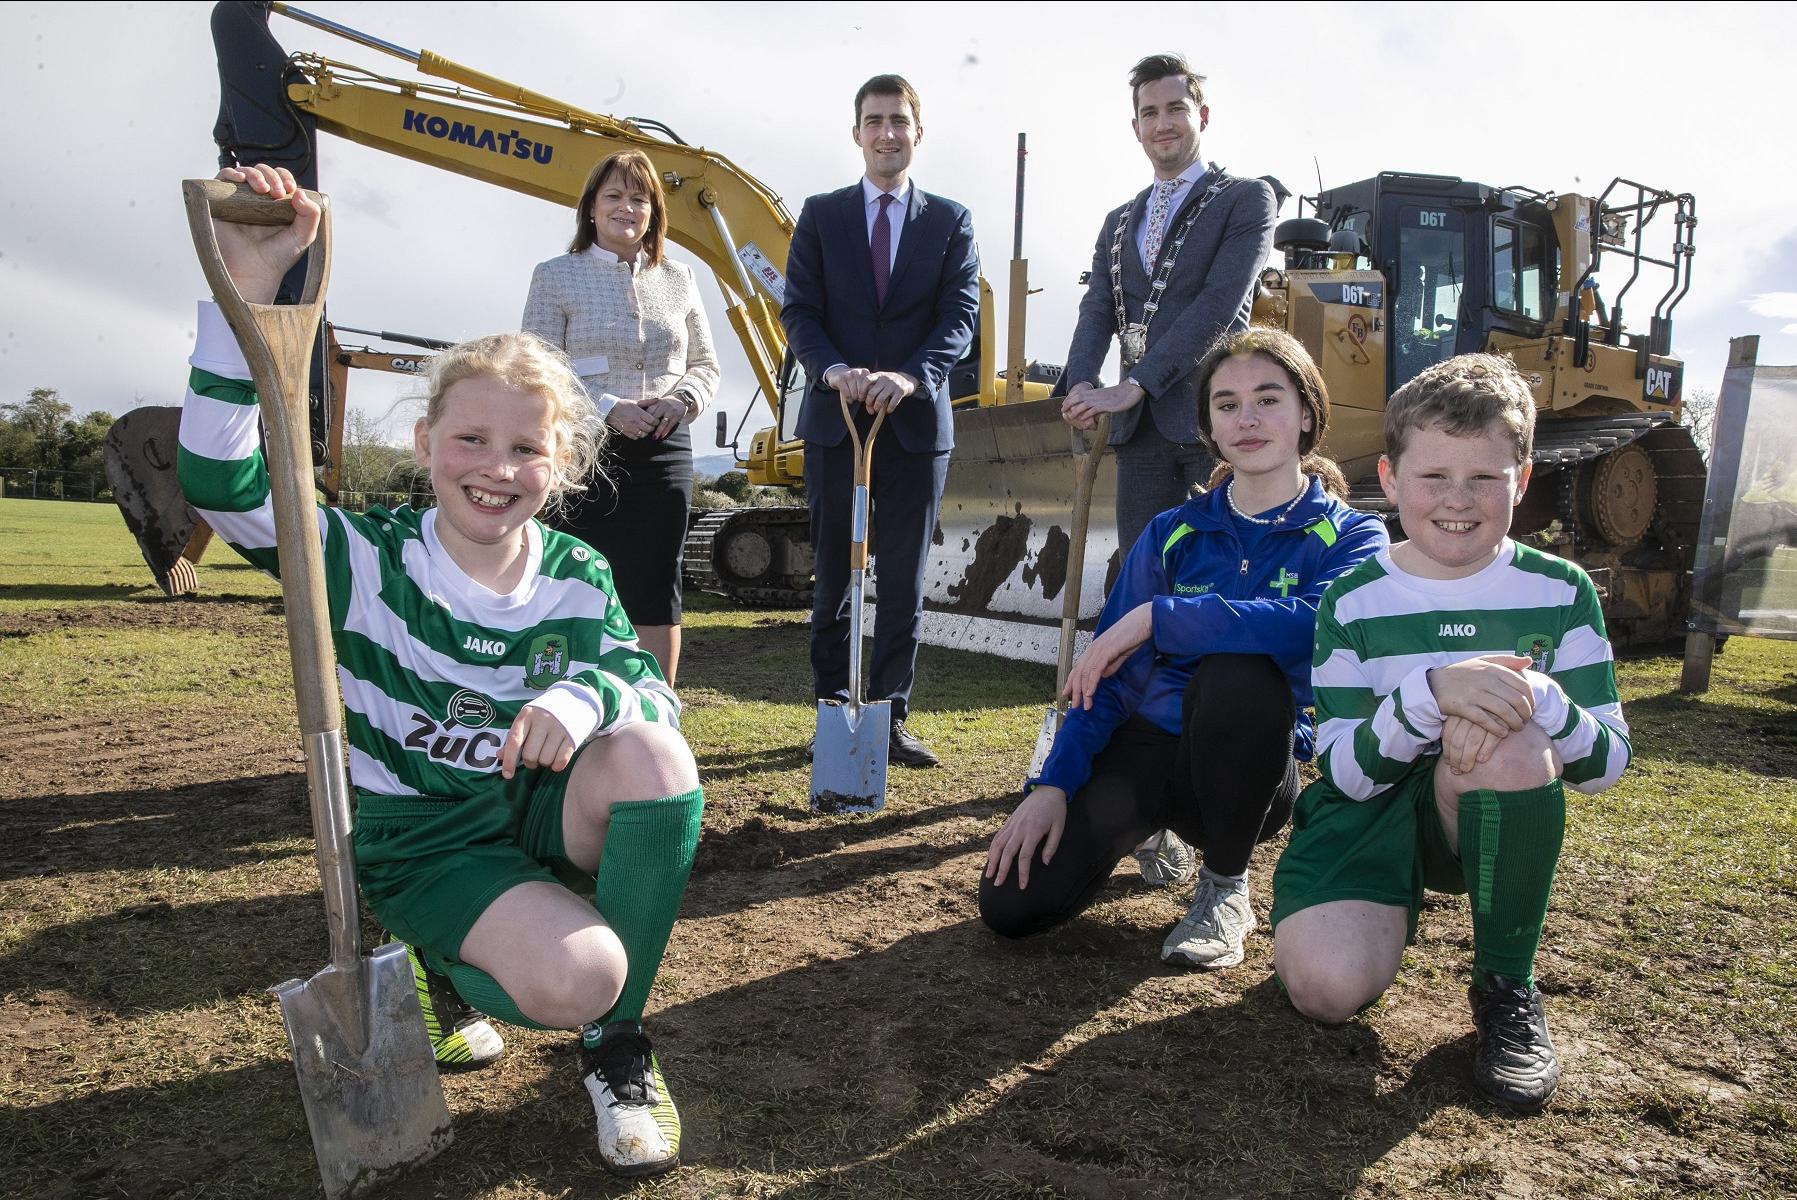 Sophie Bell, Castleknock Celtic; Chief Executive of Fingal, AnnMarie Farrelly; Minister for Sport, Jack Chambers; Deputy Mayor of Fingal, Cllr Daniel Whooley; Mia Coquart, Metro St. Brigid's Athletics Club; and Harry Bell, Castleknock Celtic